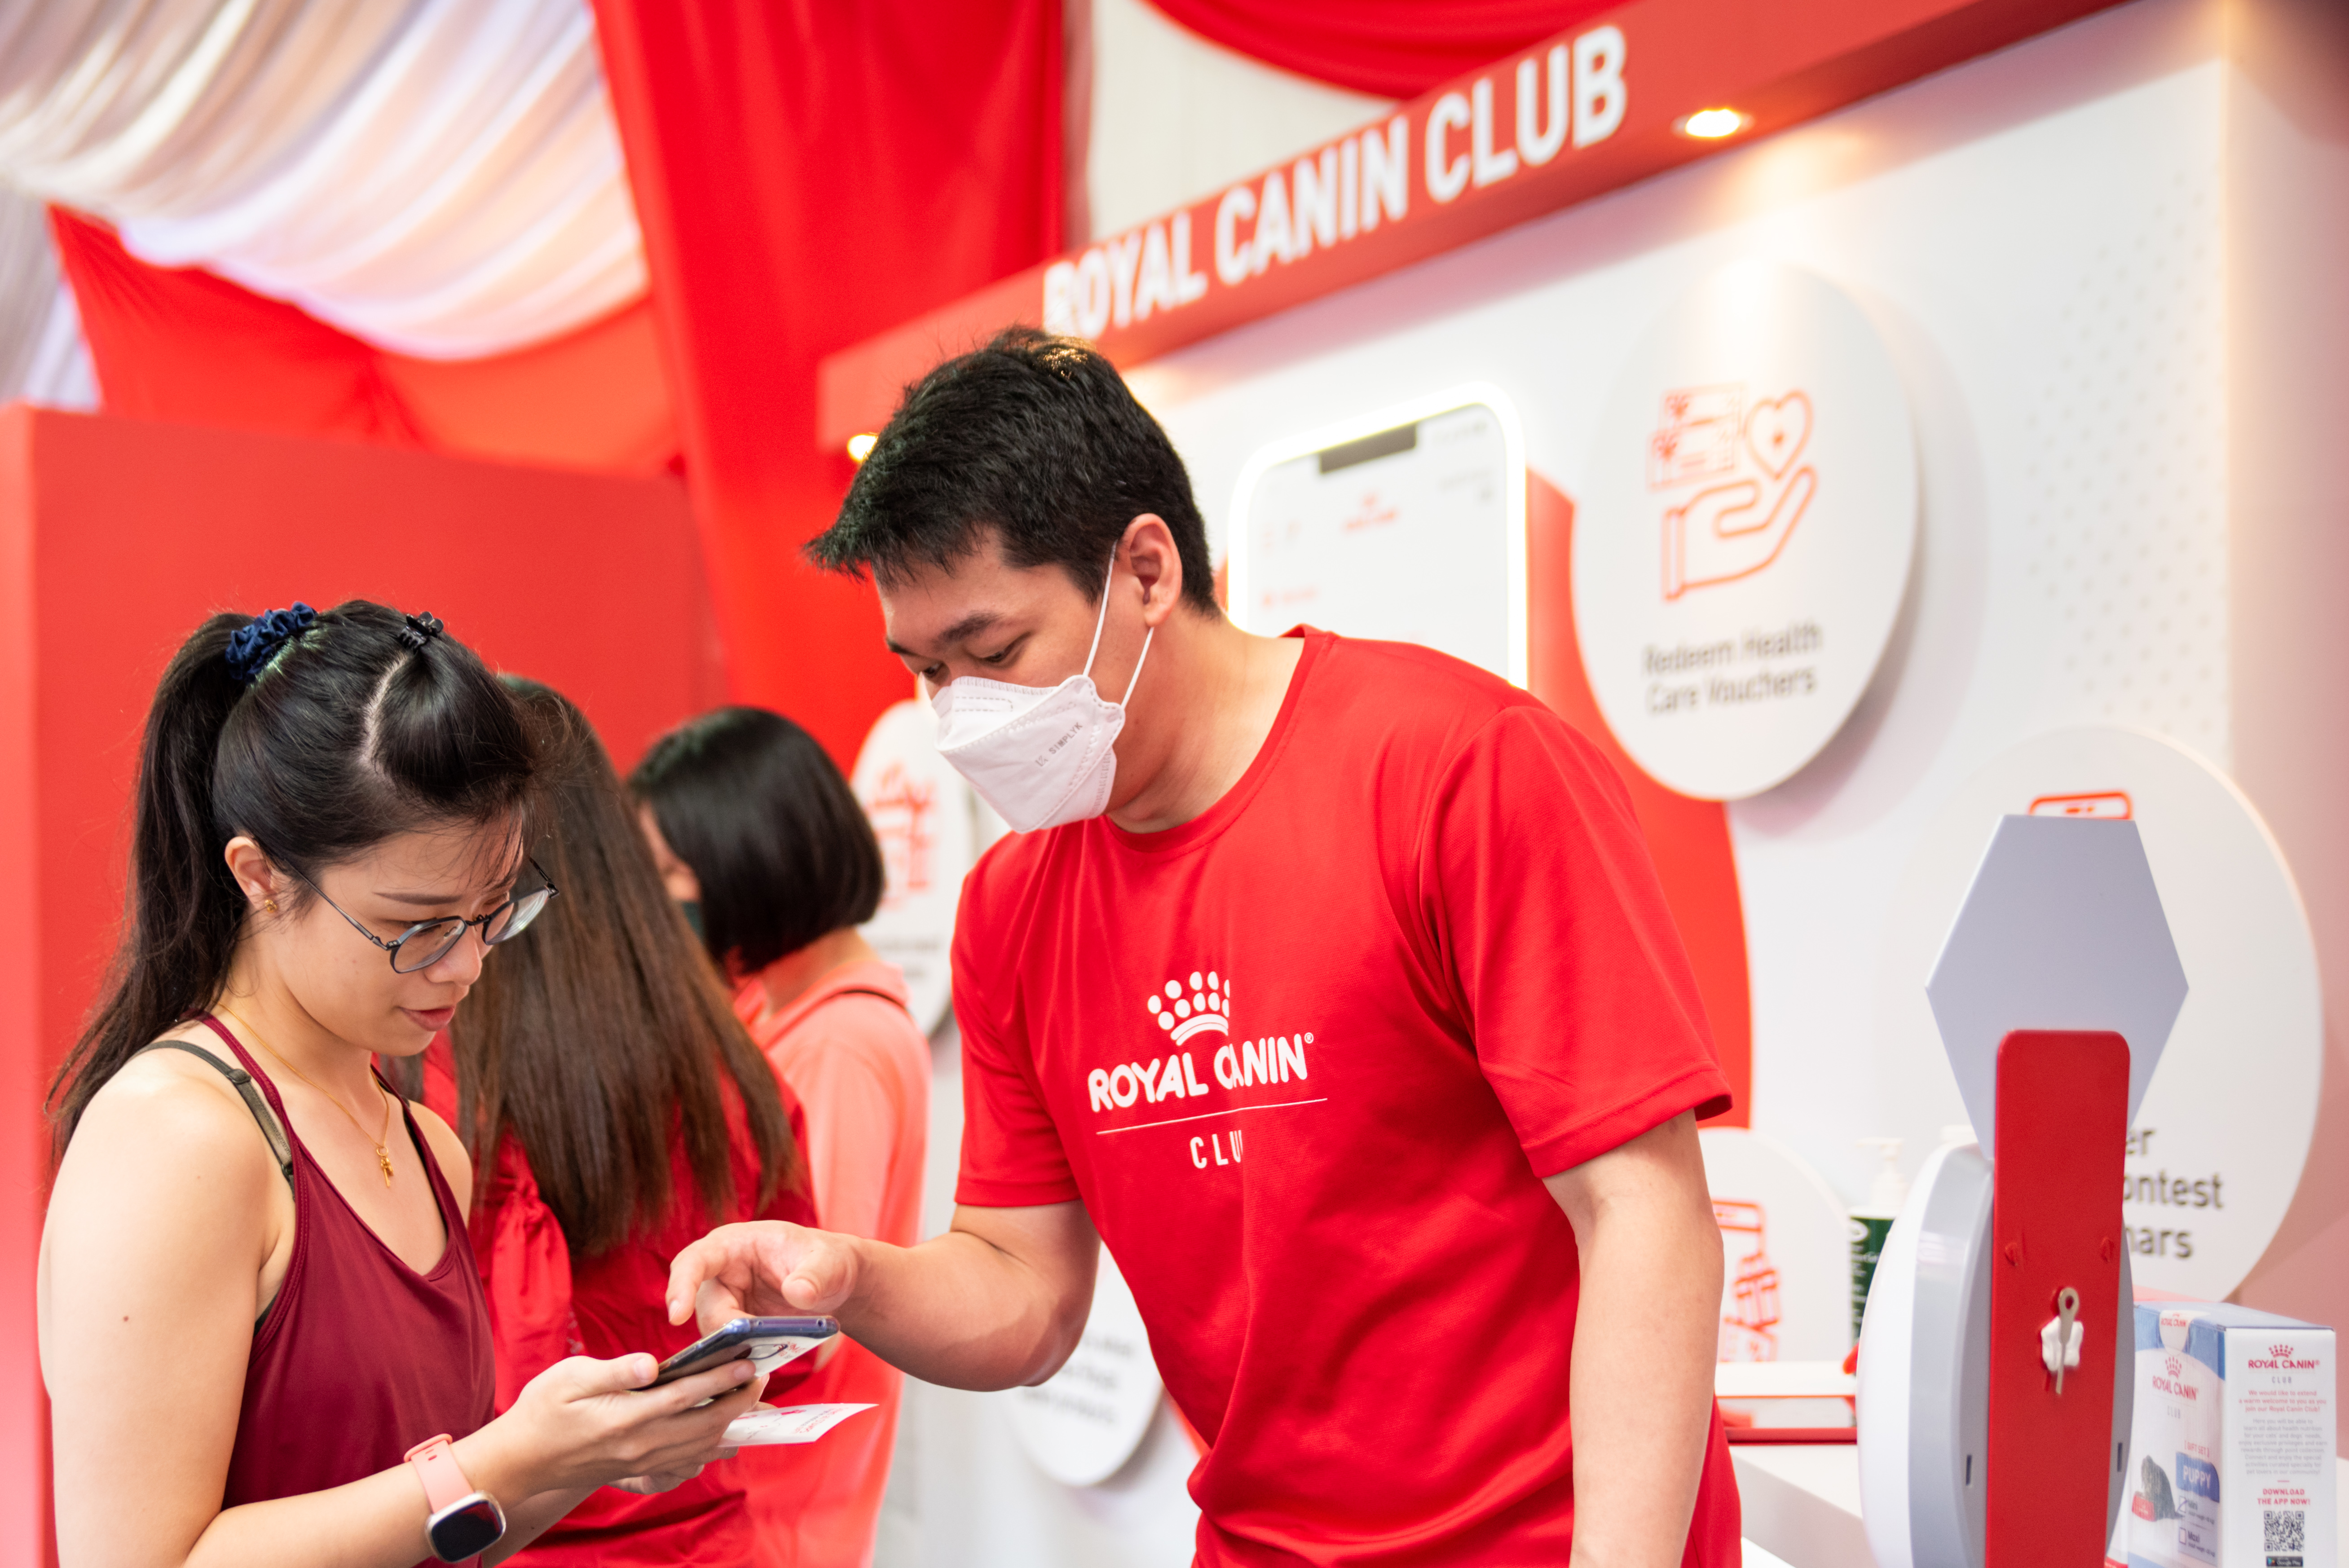 Paws Day Out_ Pet owners redeem the RM60 digital healthcare voucher on Royal Canin Club mobile app